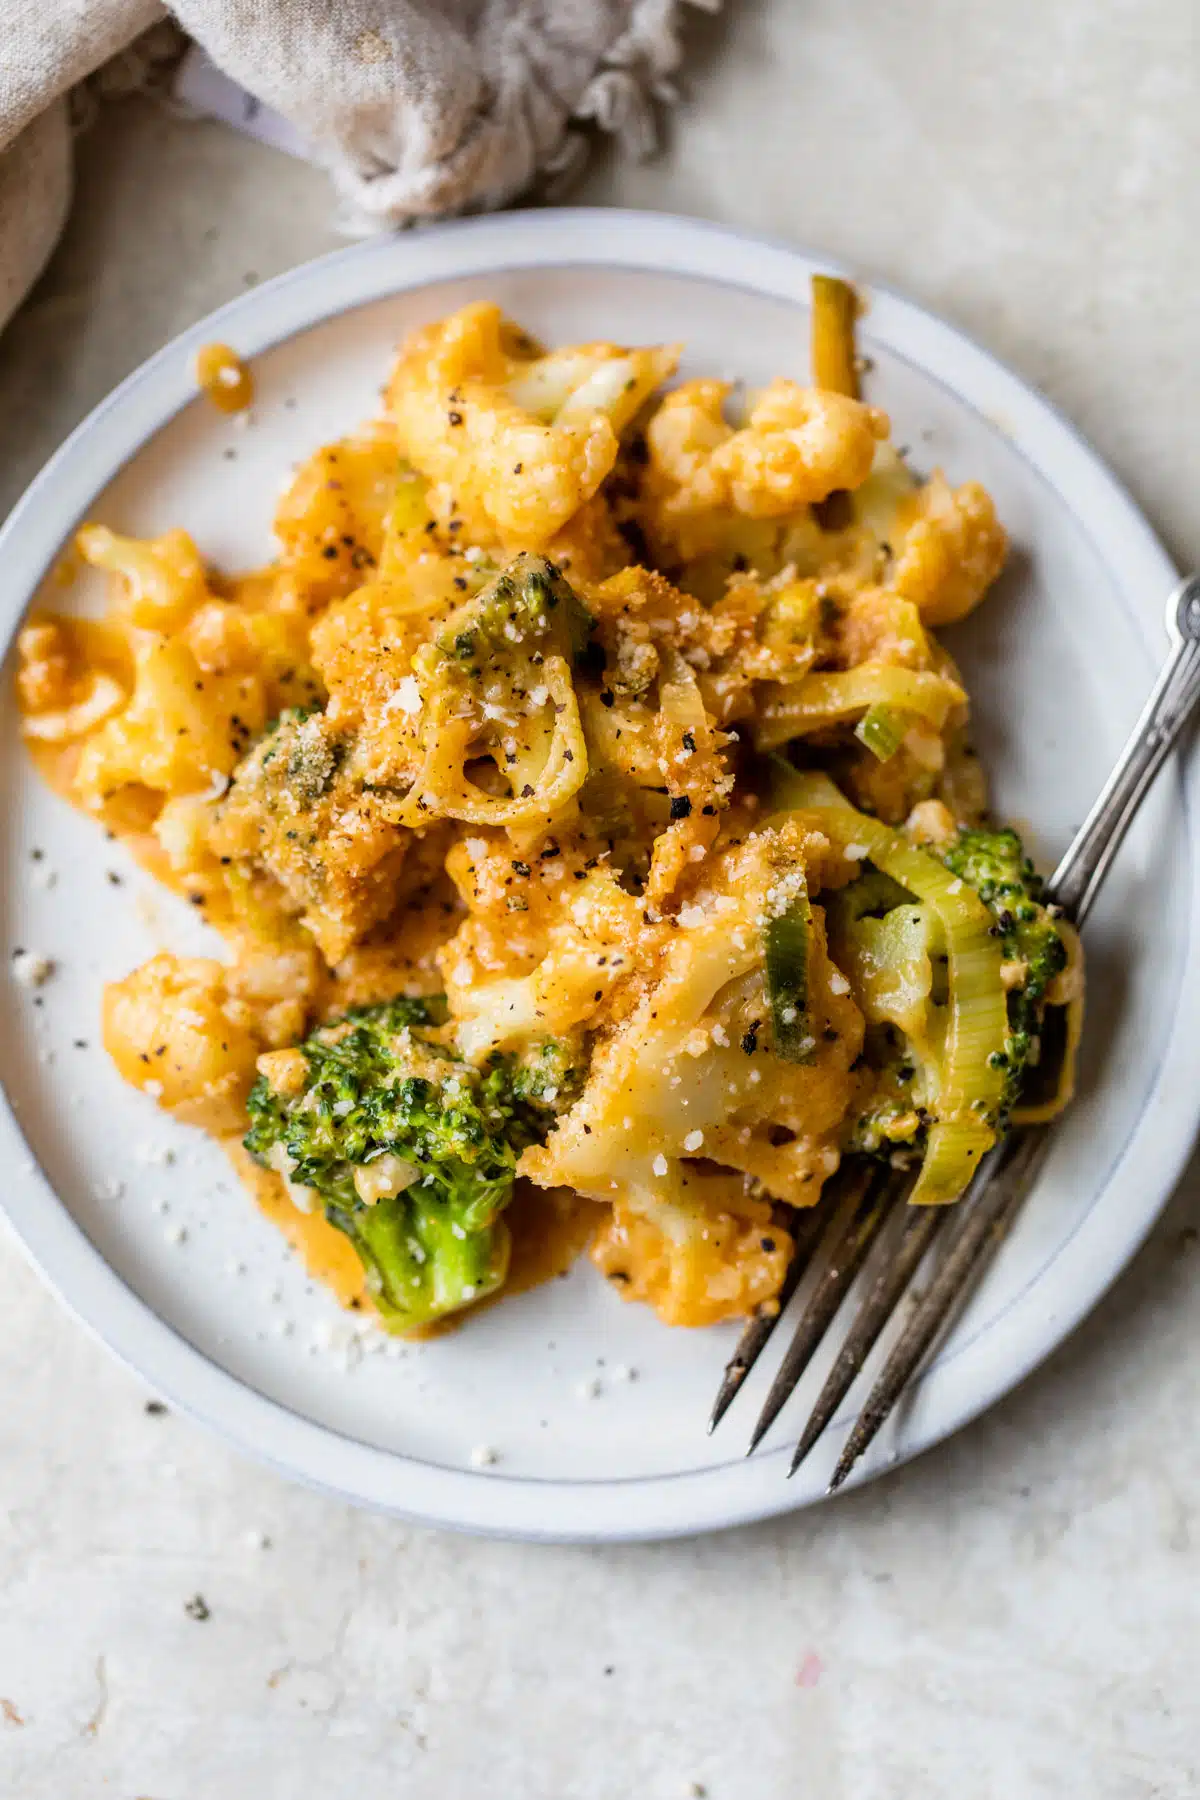 a plate of broccoli and cauliflower coated in a cheese sauce with a fork